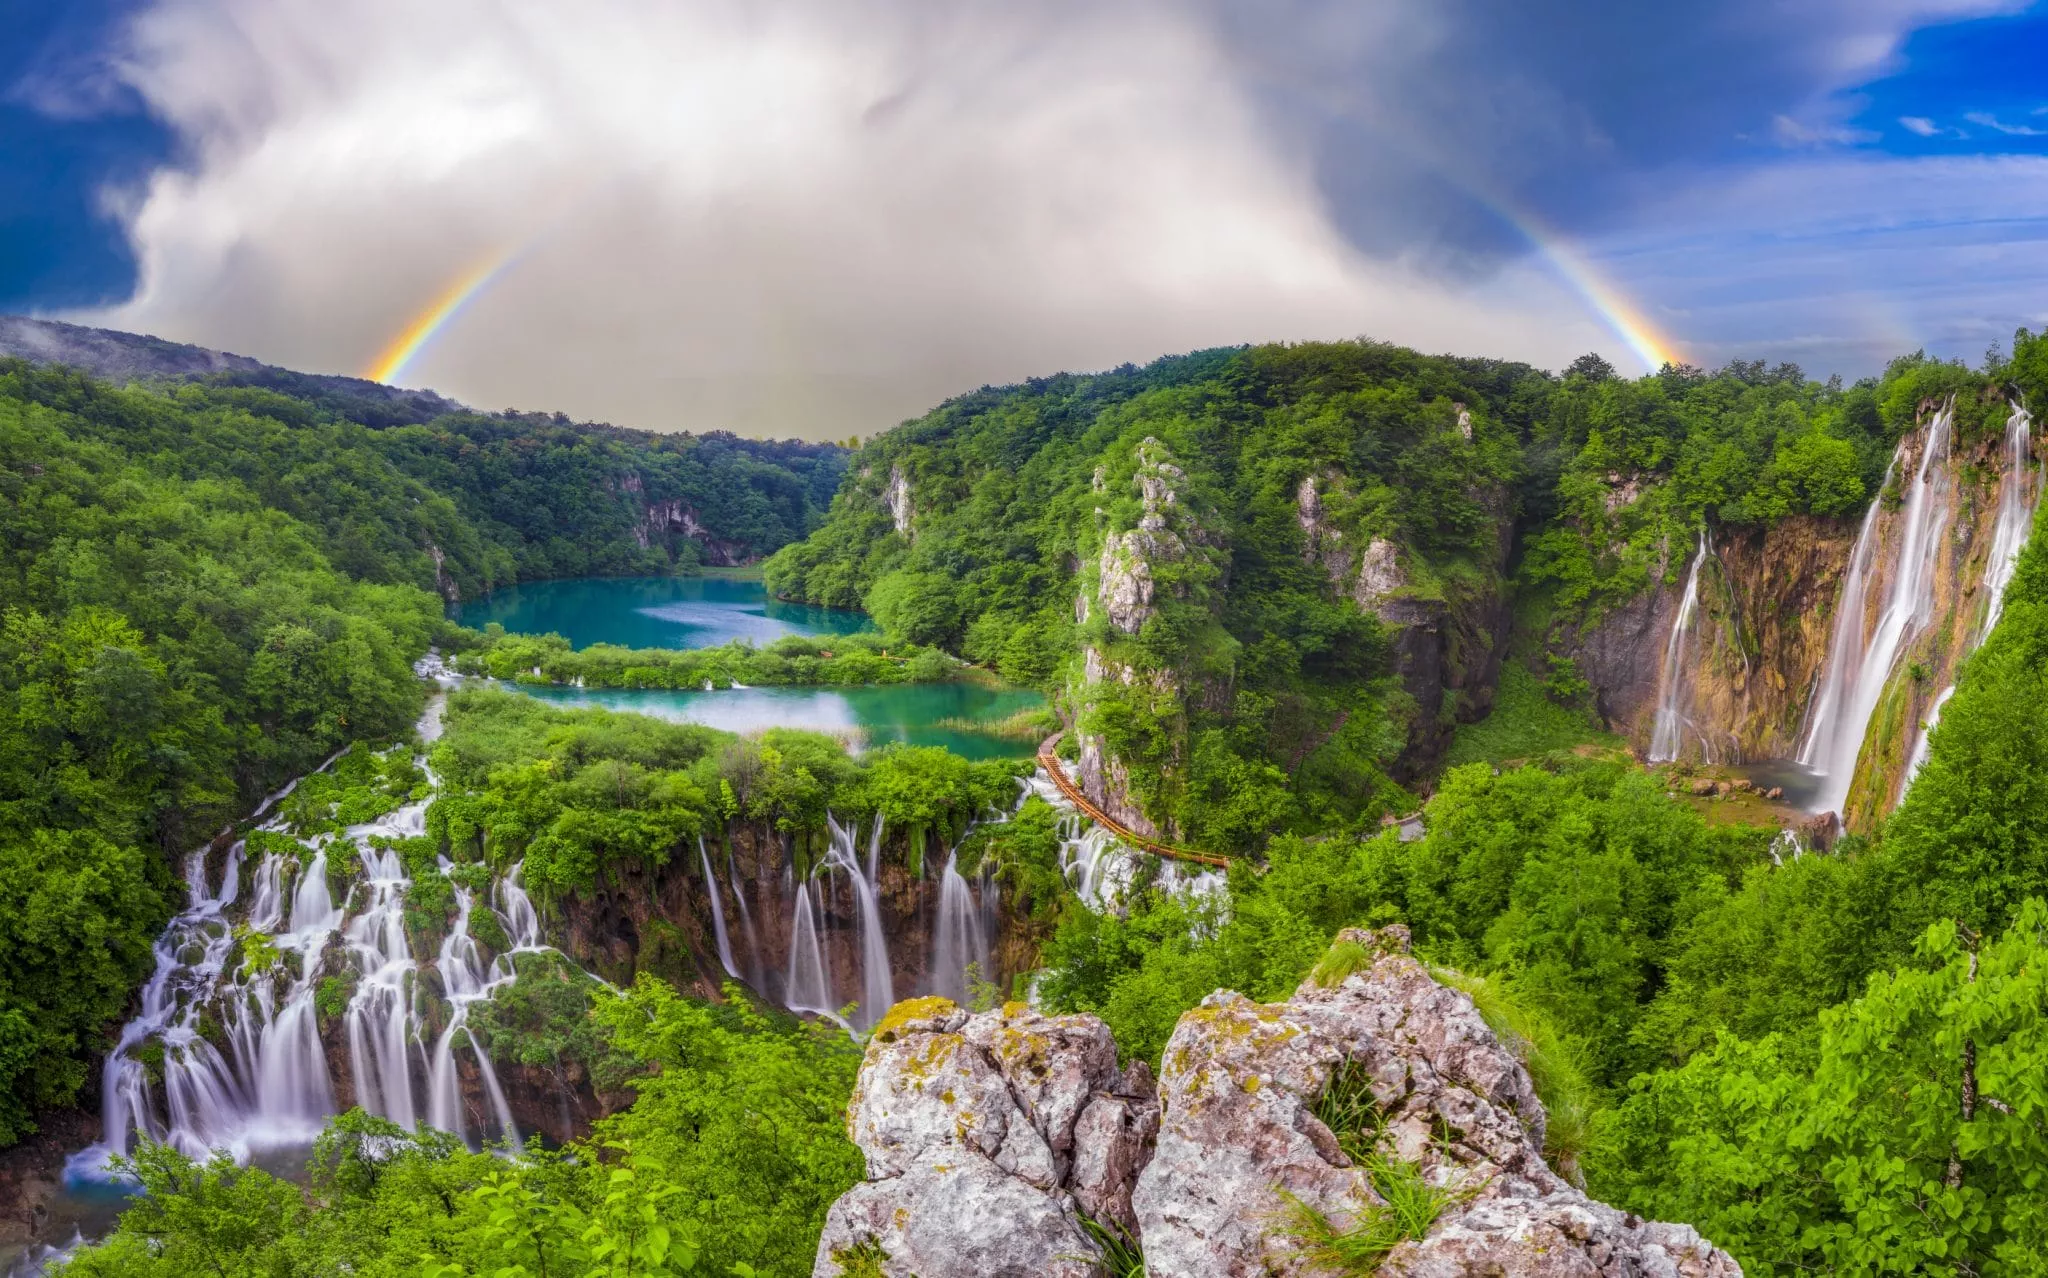 Views-across-the-waterfalls-in-Plitvice-scaled-2